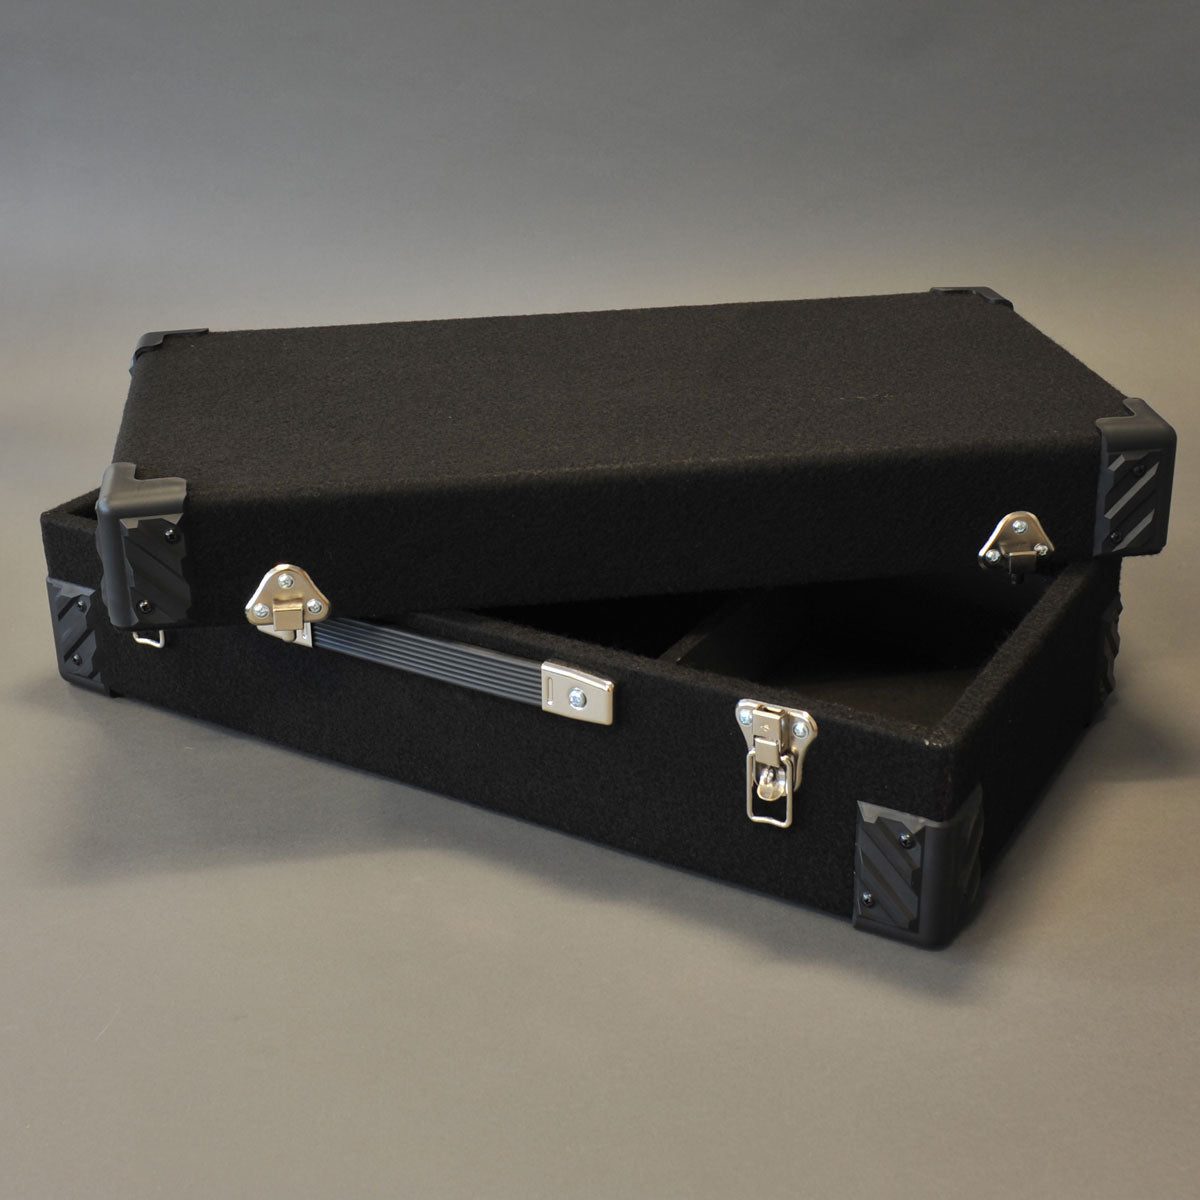 WOODEN TRUNK COVERED WITH BLACK FABRIC FOR 300 RECORDS 45 REVS 7 INCHES